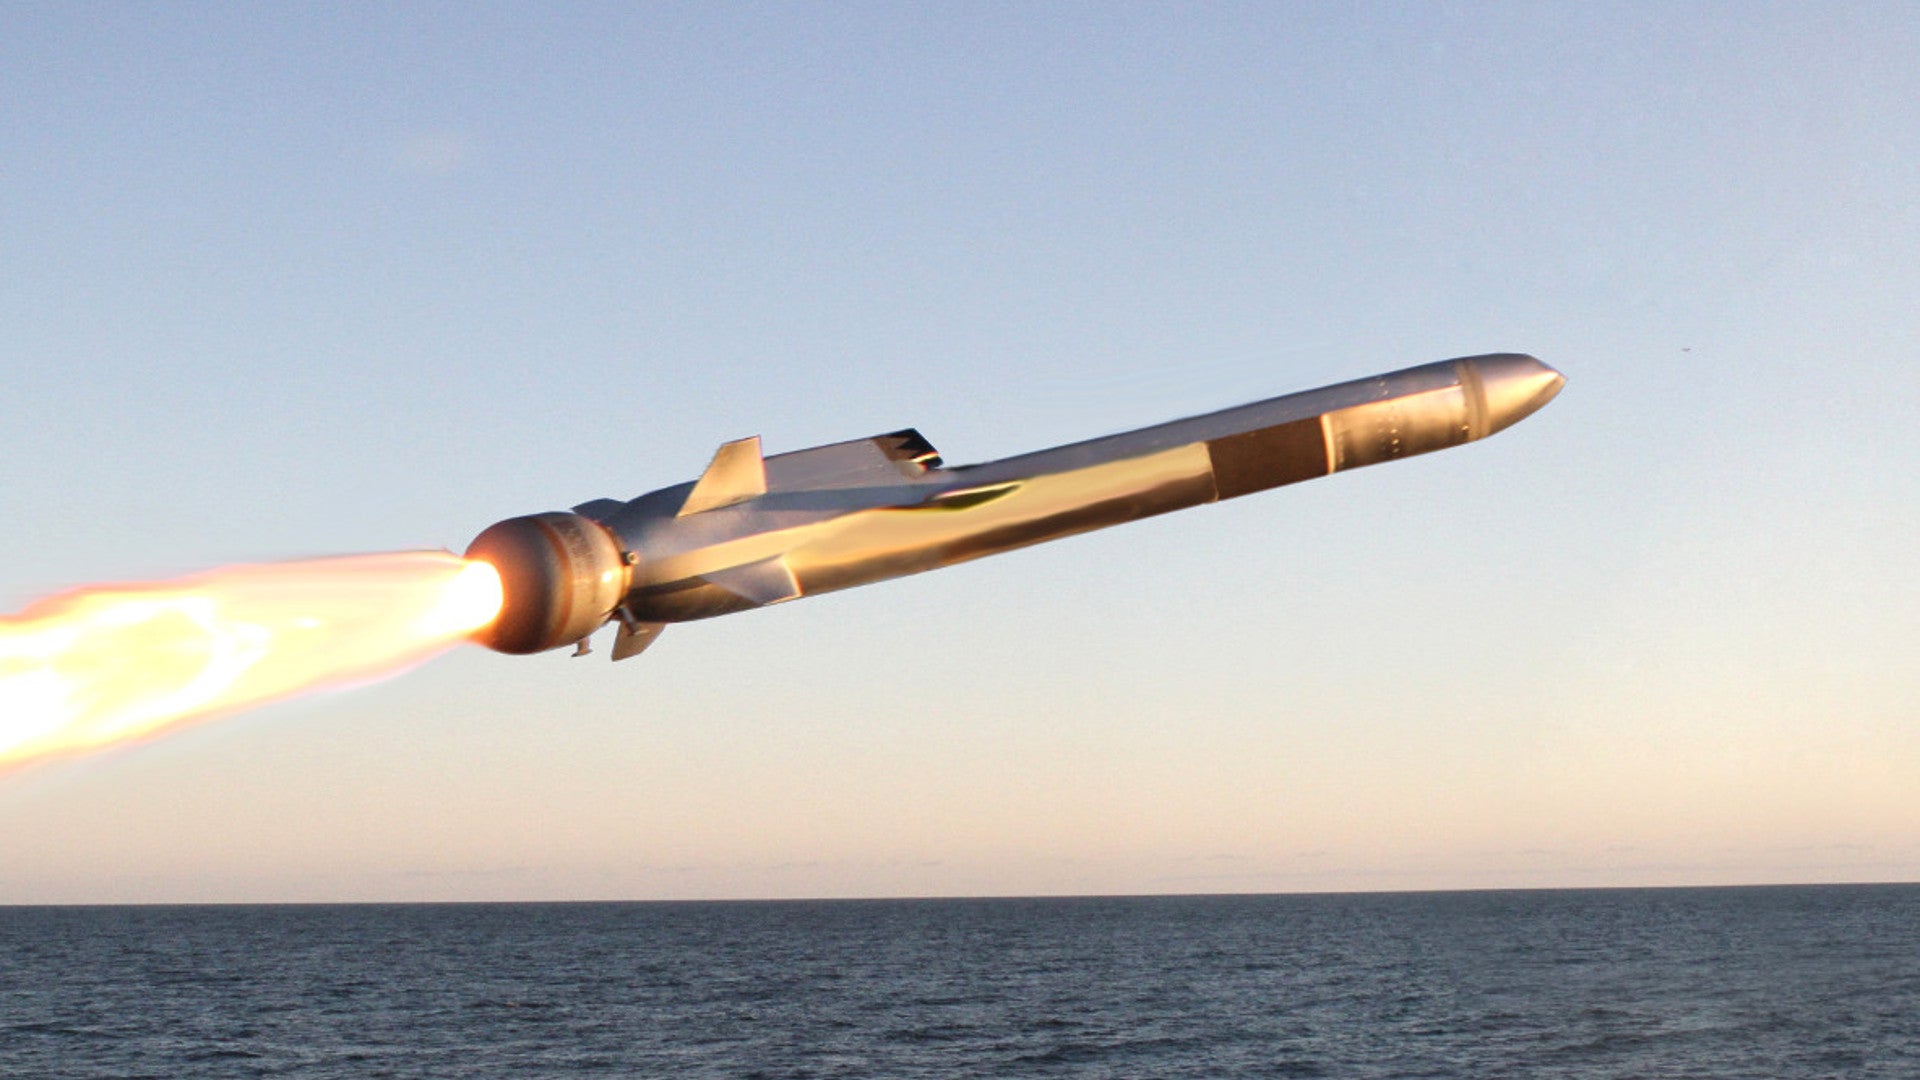 It’s Official, The Navy’s Next Anti-Ship Cruise Missile Will Be The Naval Strike Missile